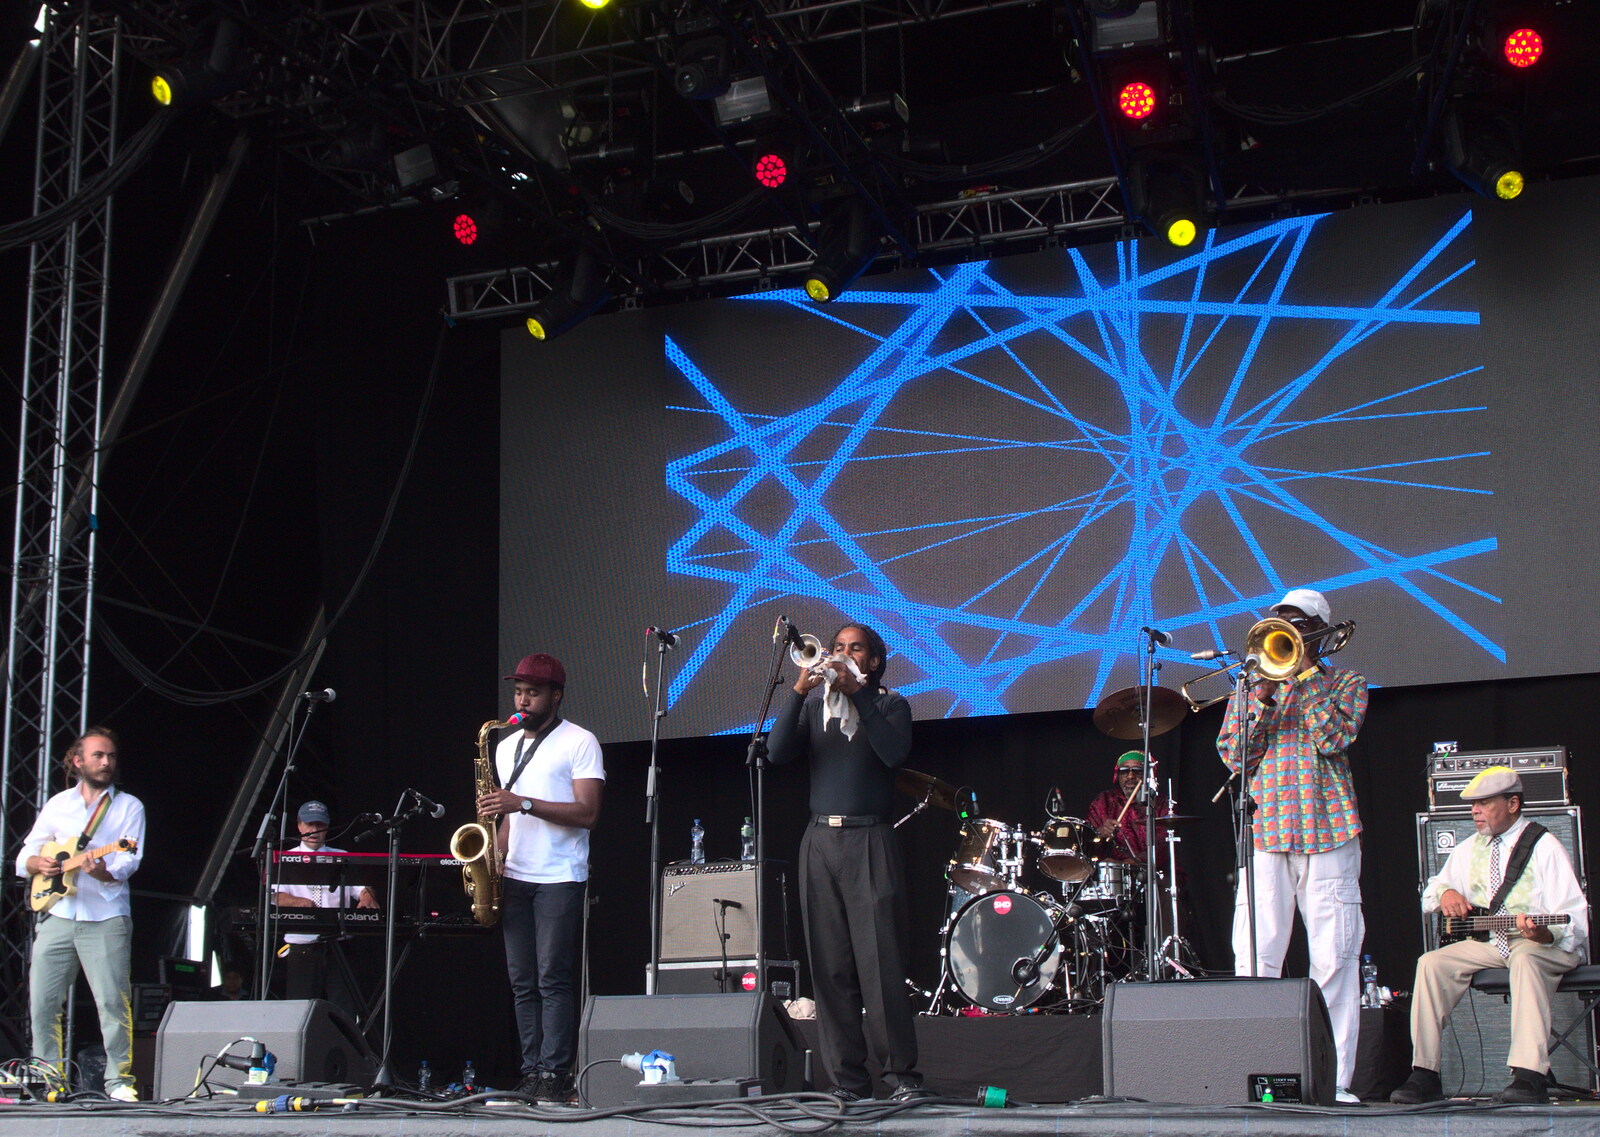 The Skatalites on stage from Beatyard Festival, Dún Laoghaire, County Dublin, Ireland - 5th August 2018